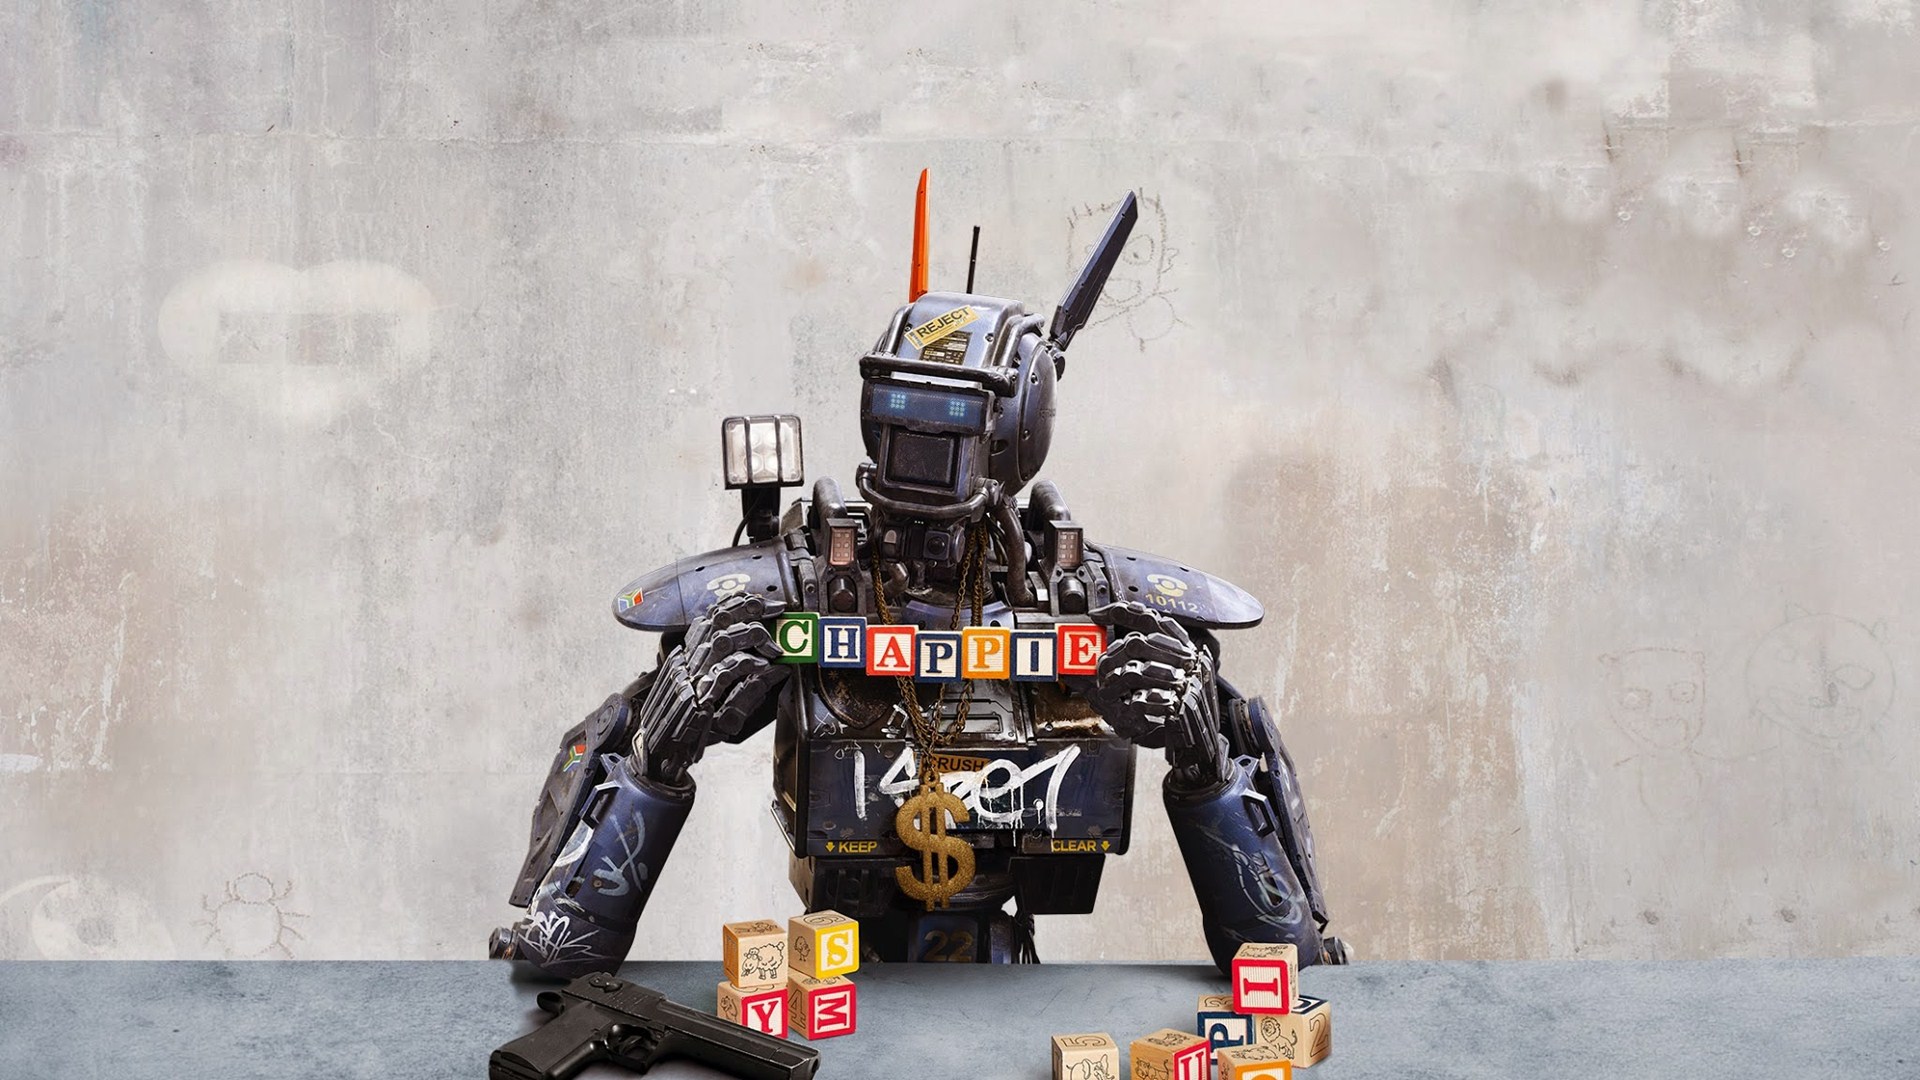 The newest addition to a pantheon of sentient robot films: chappie